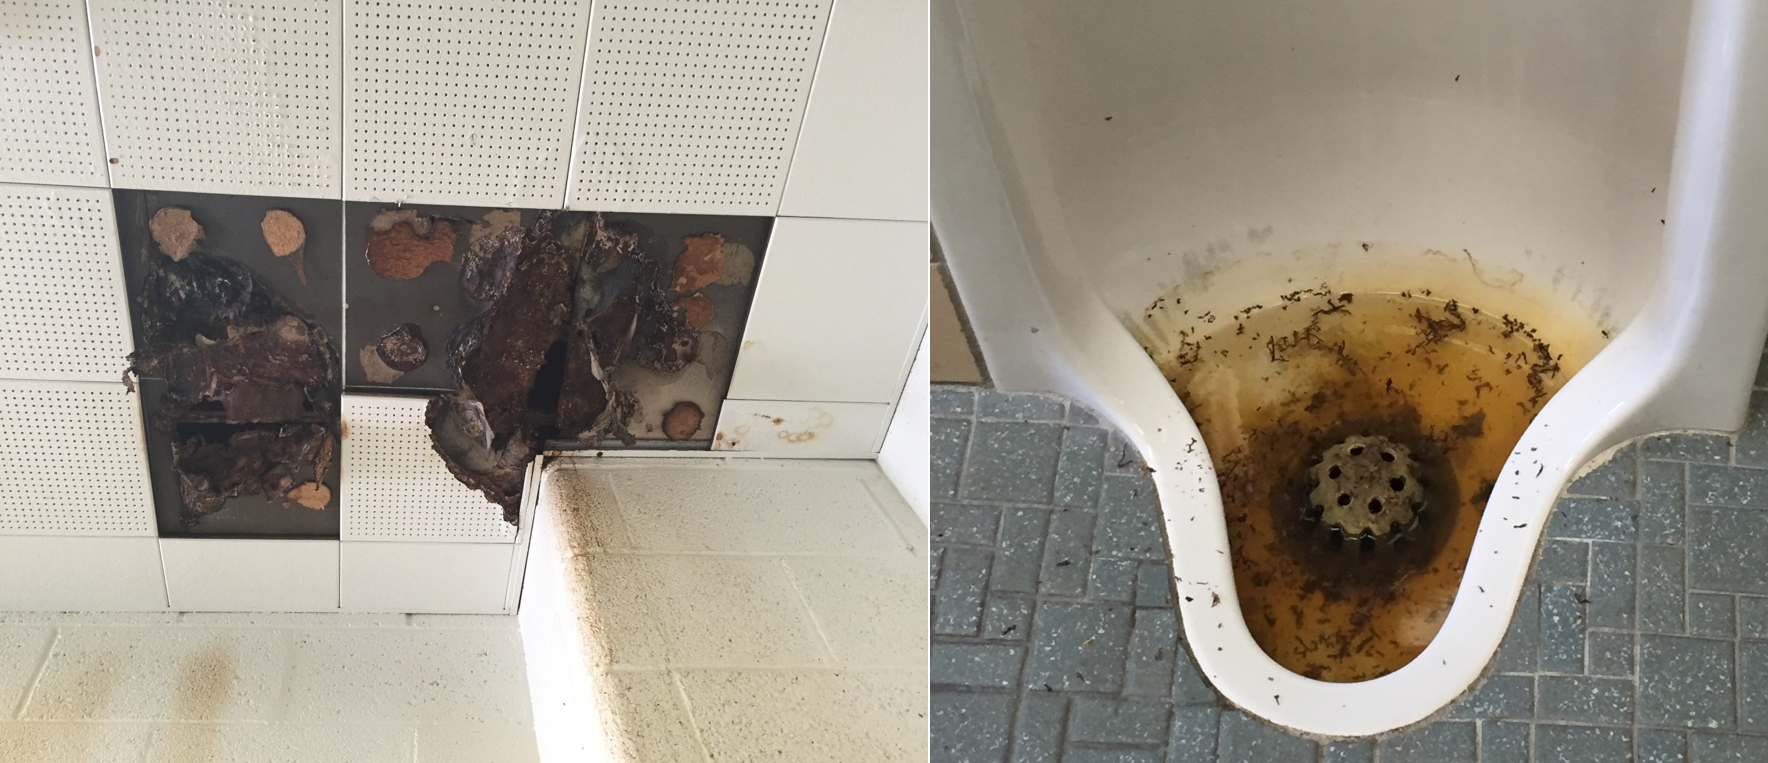 Teachers have complained about deteriorating conditions in Detroit public schools, and submitted these images, which they say were taken this week at Osborn College Preparatory Academy – a water-damaged, falling ceiling and a non-functioning urinal crawling with bugs. (Courtesy photos)